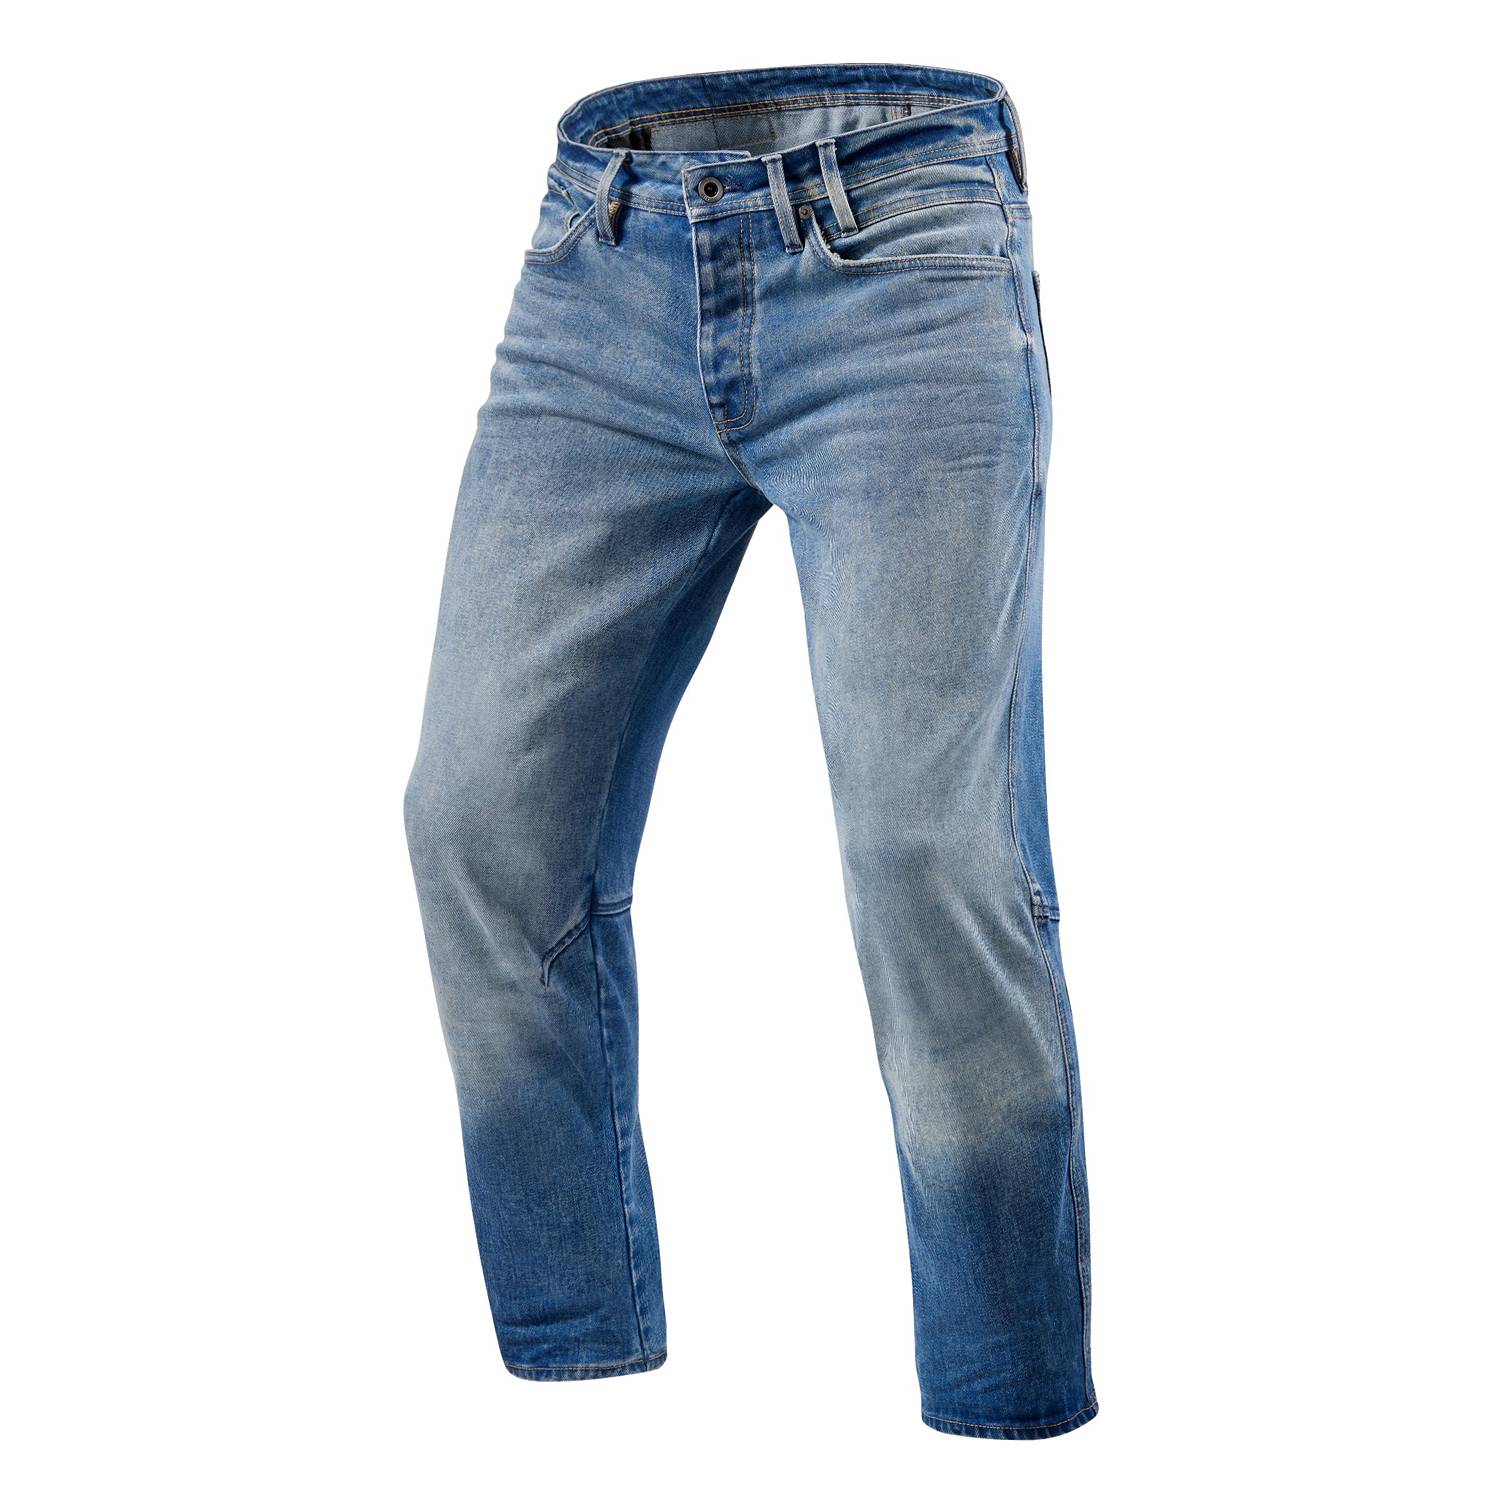 Image of REV'IT! Salt TF Mid Blue Used Motorcycle Jeans Talla L36/W34